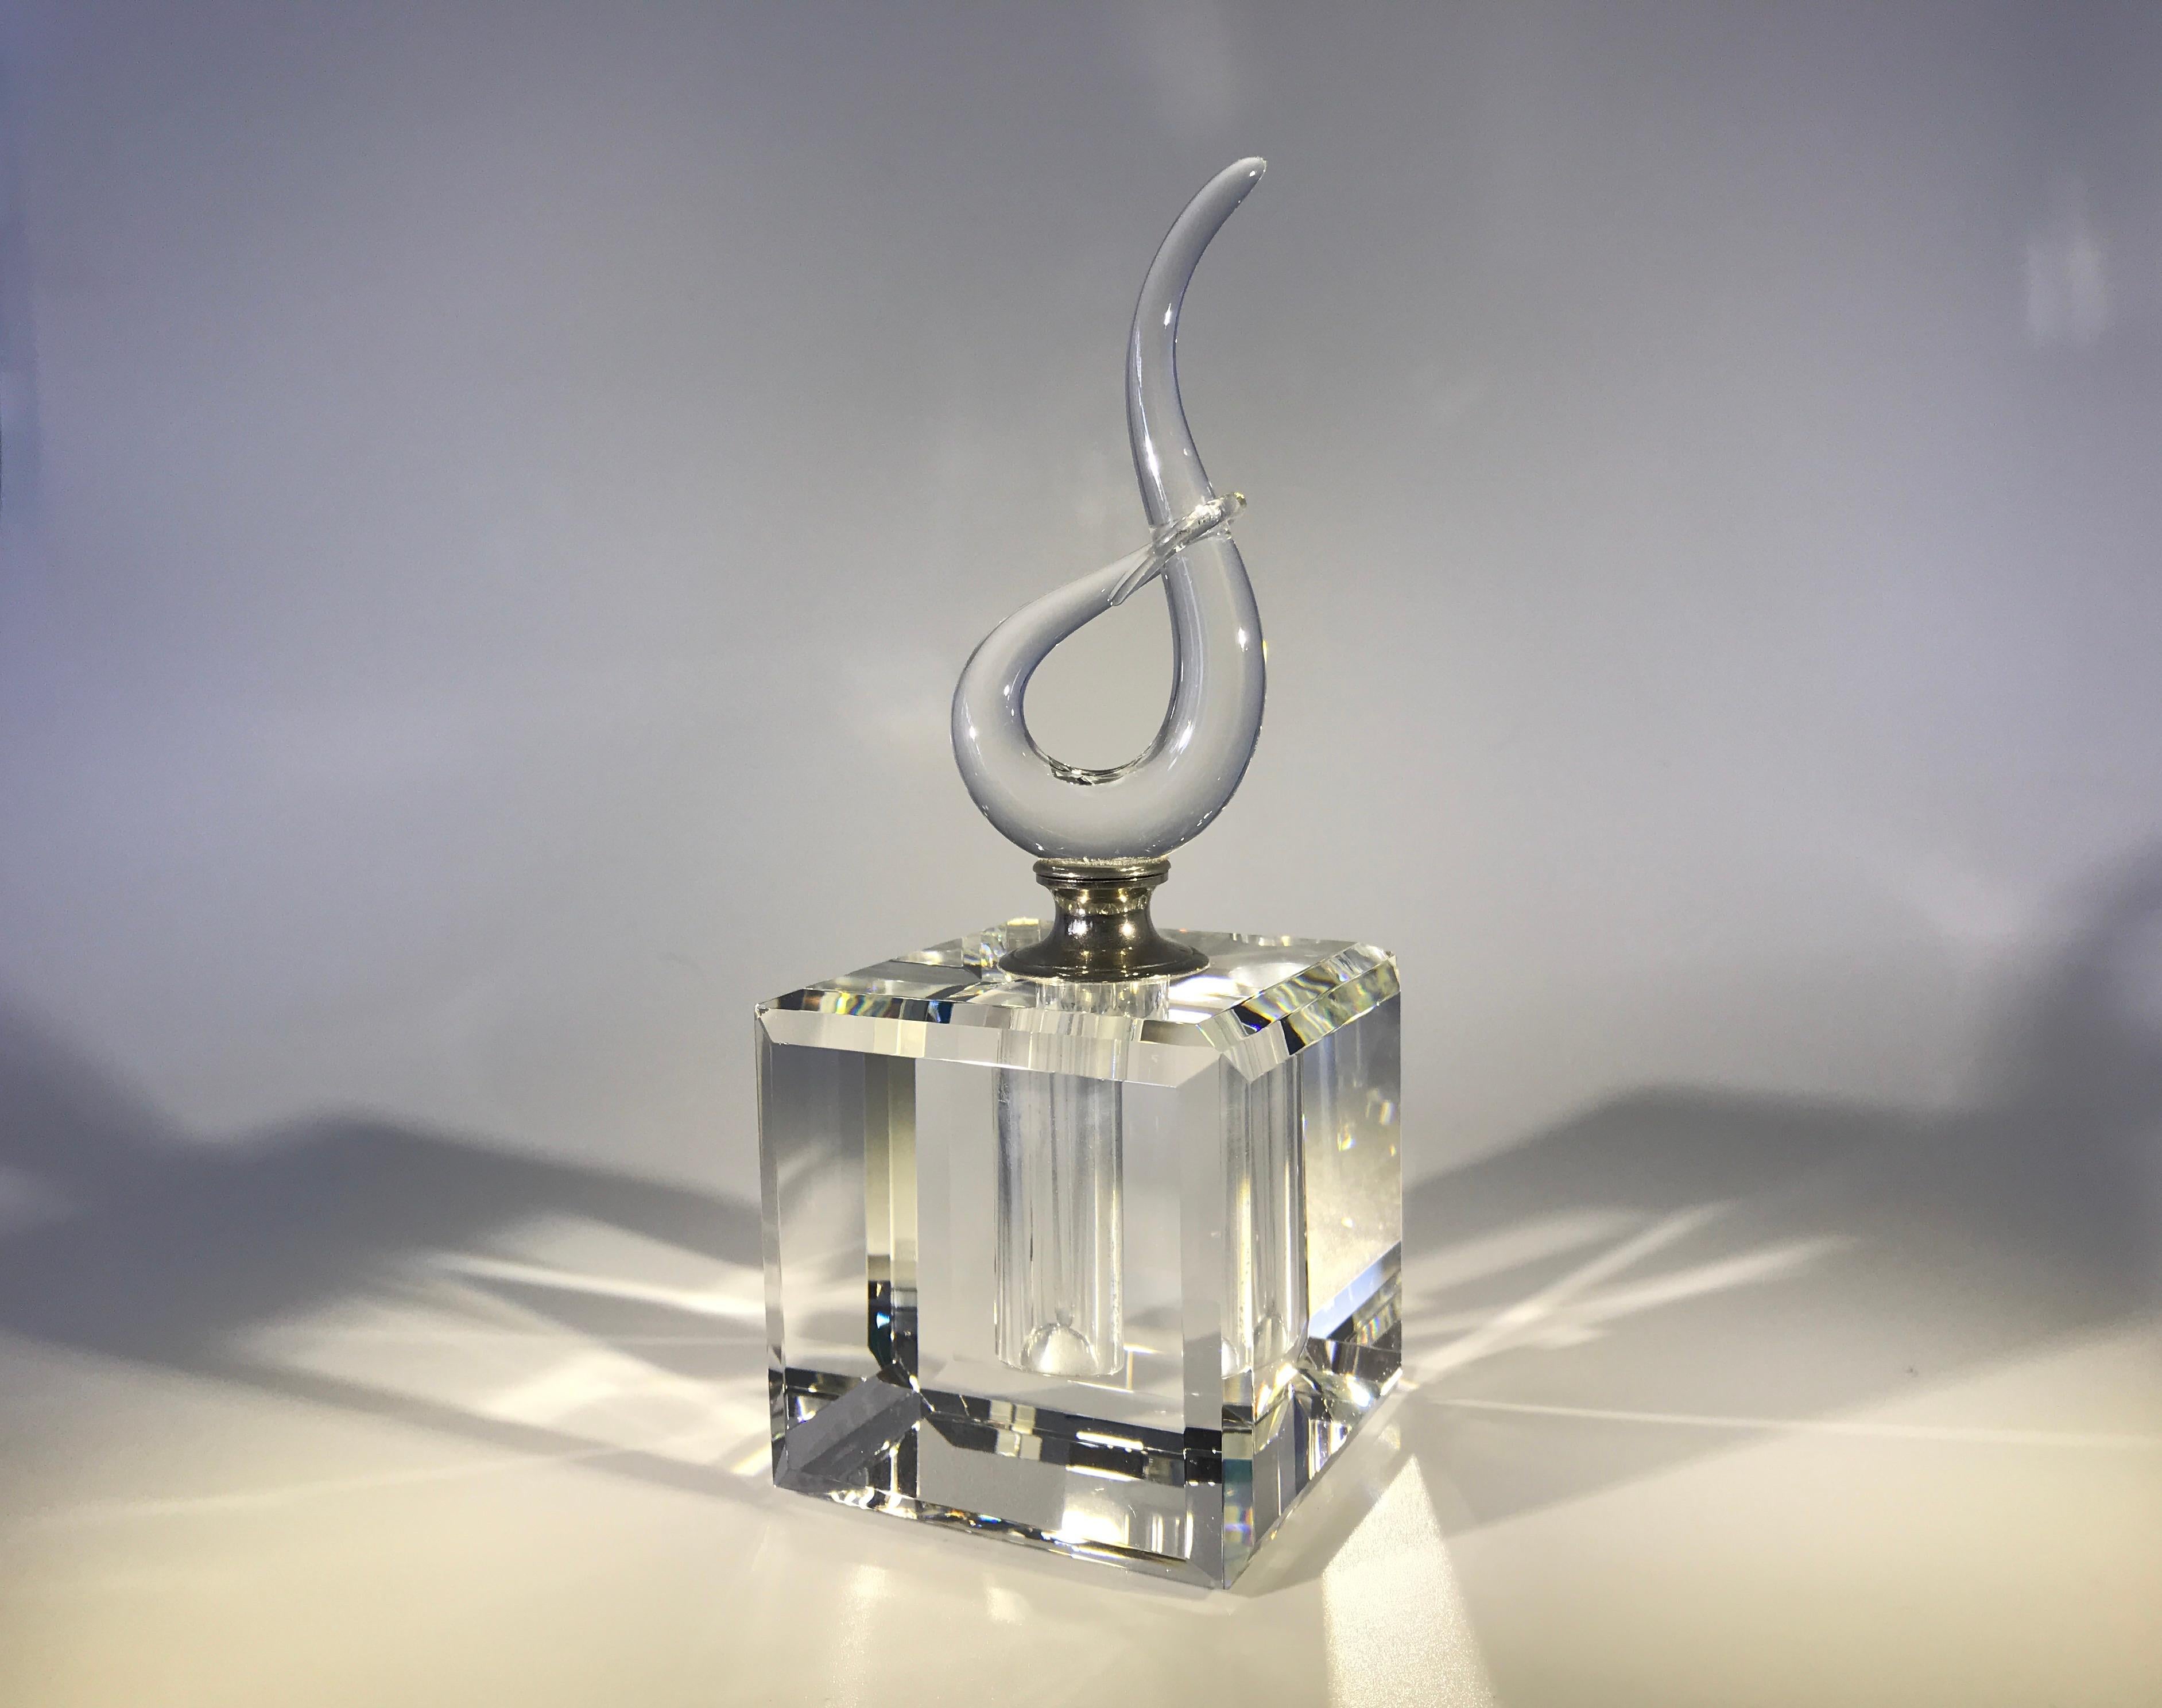 A fabulously entwined clear French crystal, faceted cube perfume bottle from the 1970s
A weighty and impressive piece with a delicate entwined crystal stopper
Silver colored collar. The glass pipet scent rod is in perfect condition
circa